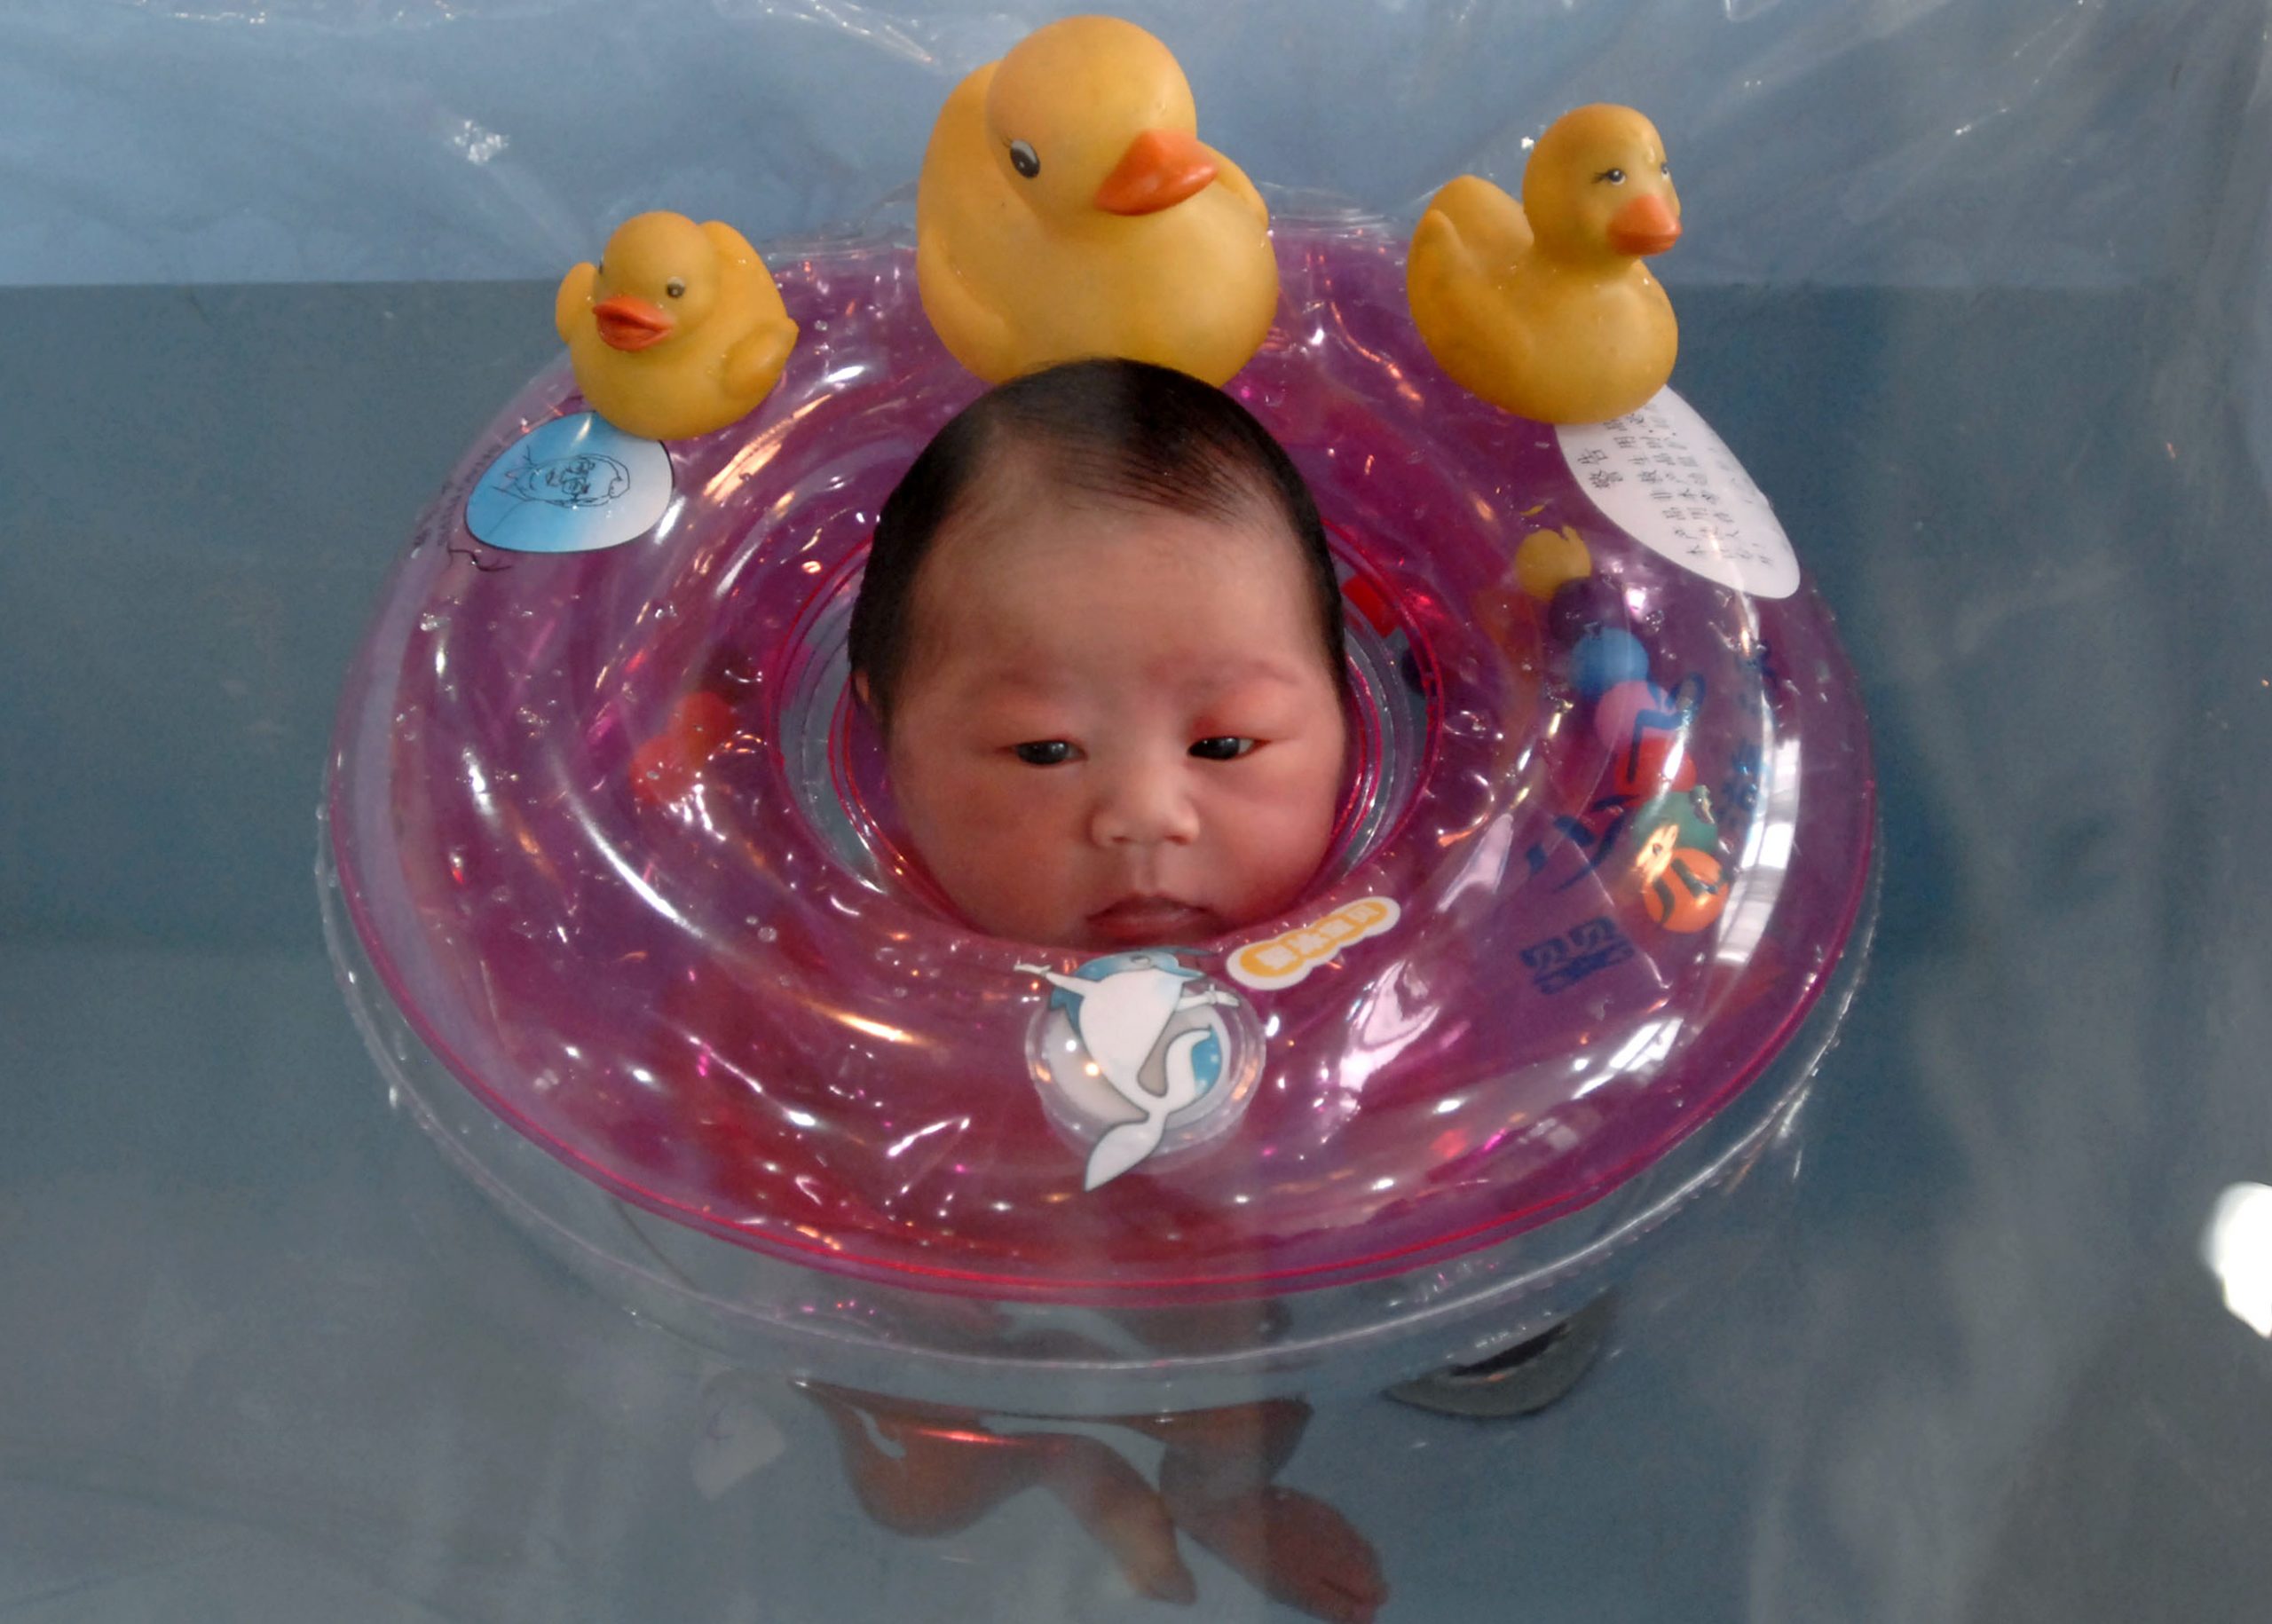 A newborn baby floats in a basin at a hospital in Nanjing, eastern China's Jiangsu province January 12, 2007. China's population will increase by 200 million in the next thirty years, according to a report issued Thursday by the State Population and Family Planning Commission, Xinhua News Agency reported. REUTERS/Leo Lang (CHINA)